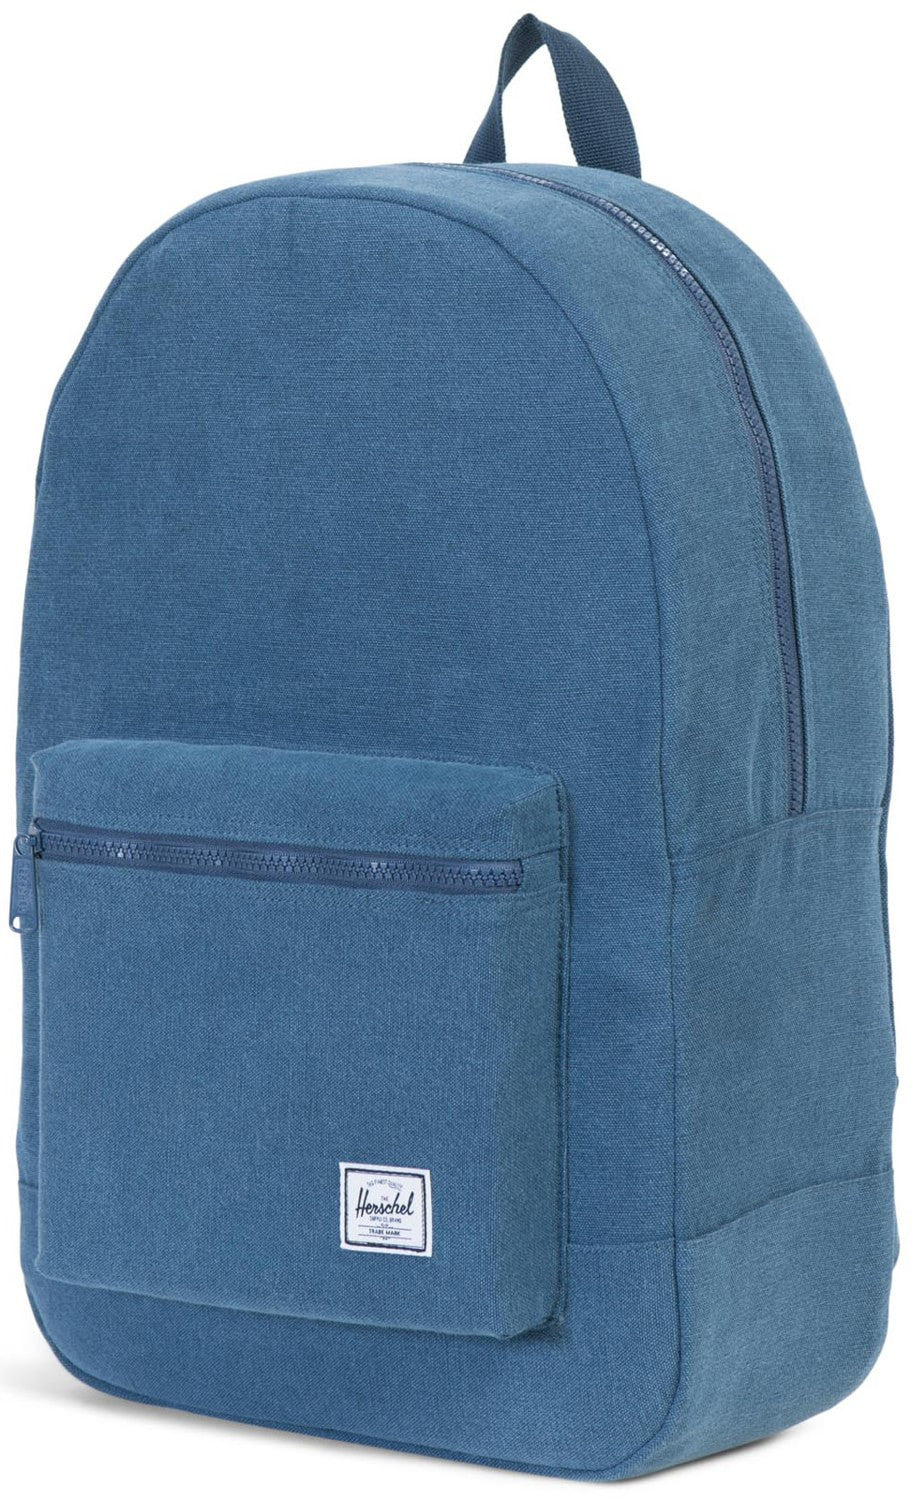 Herschel Supply Co. - Packable Daypack, Navy Canvas - The Giant Peach